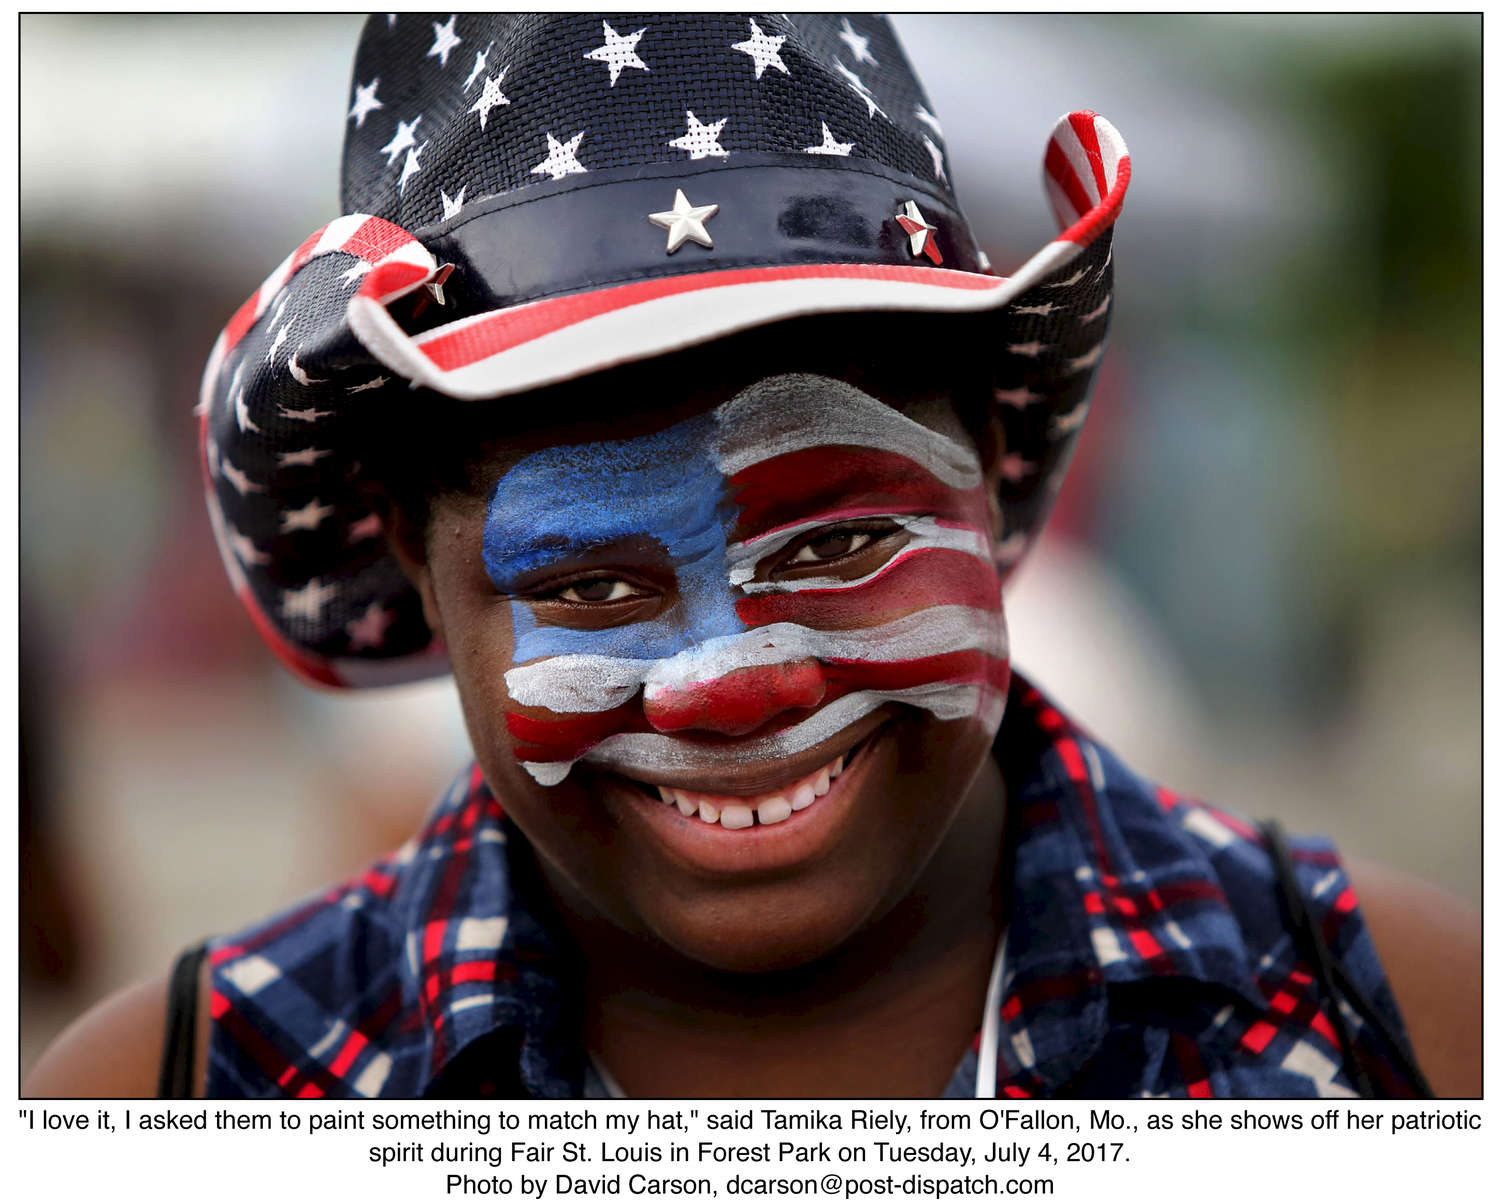 {quote}I love it, I asked them to paint something to match my hat,{quote} said Tamika Riely, from O'Fallon, Mo., as she shows off her patriotic spirit during Fair St. Louis in Forest Park on Tuesday, July 4, 2017. Photo by David Carson, dcarson@post-dispatch.com